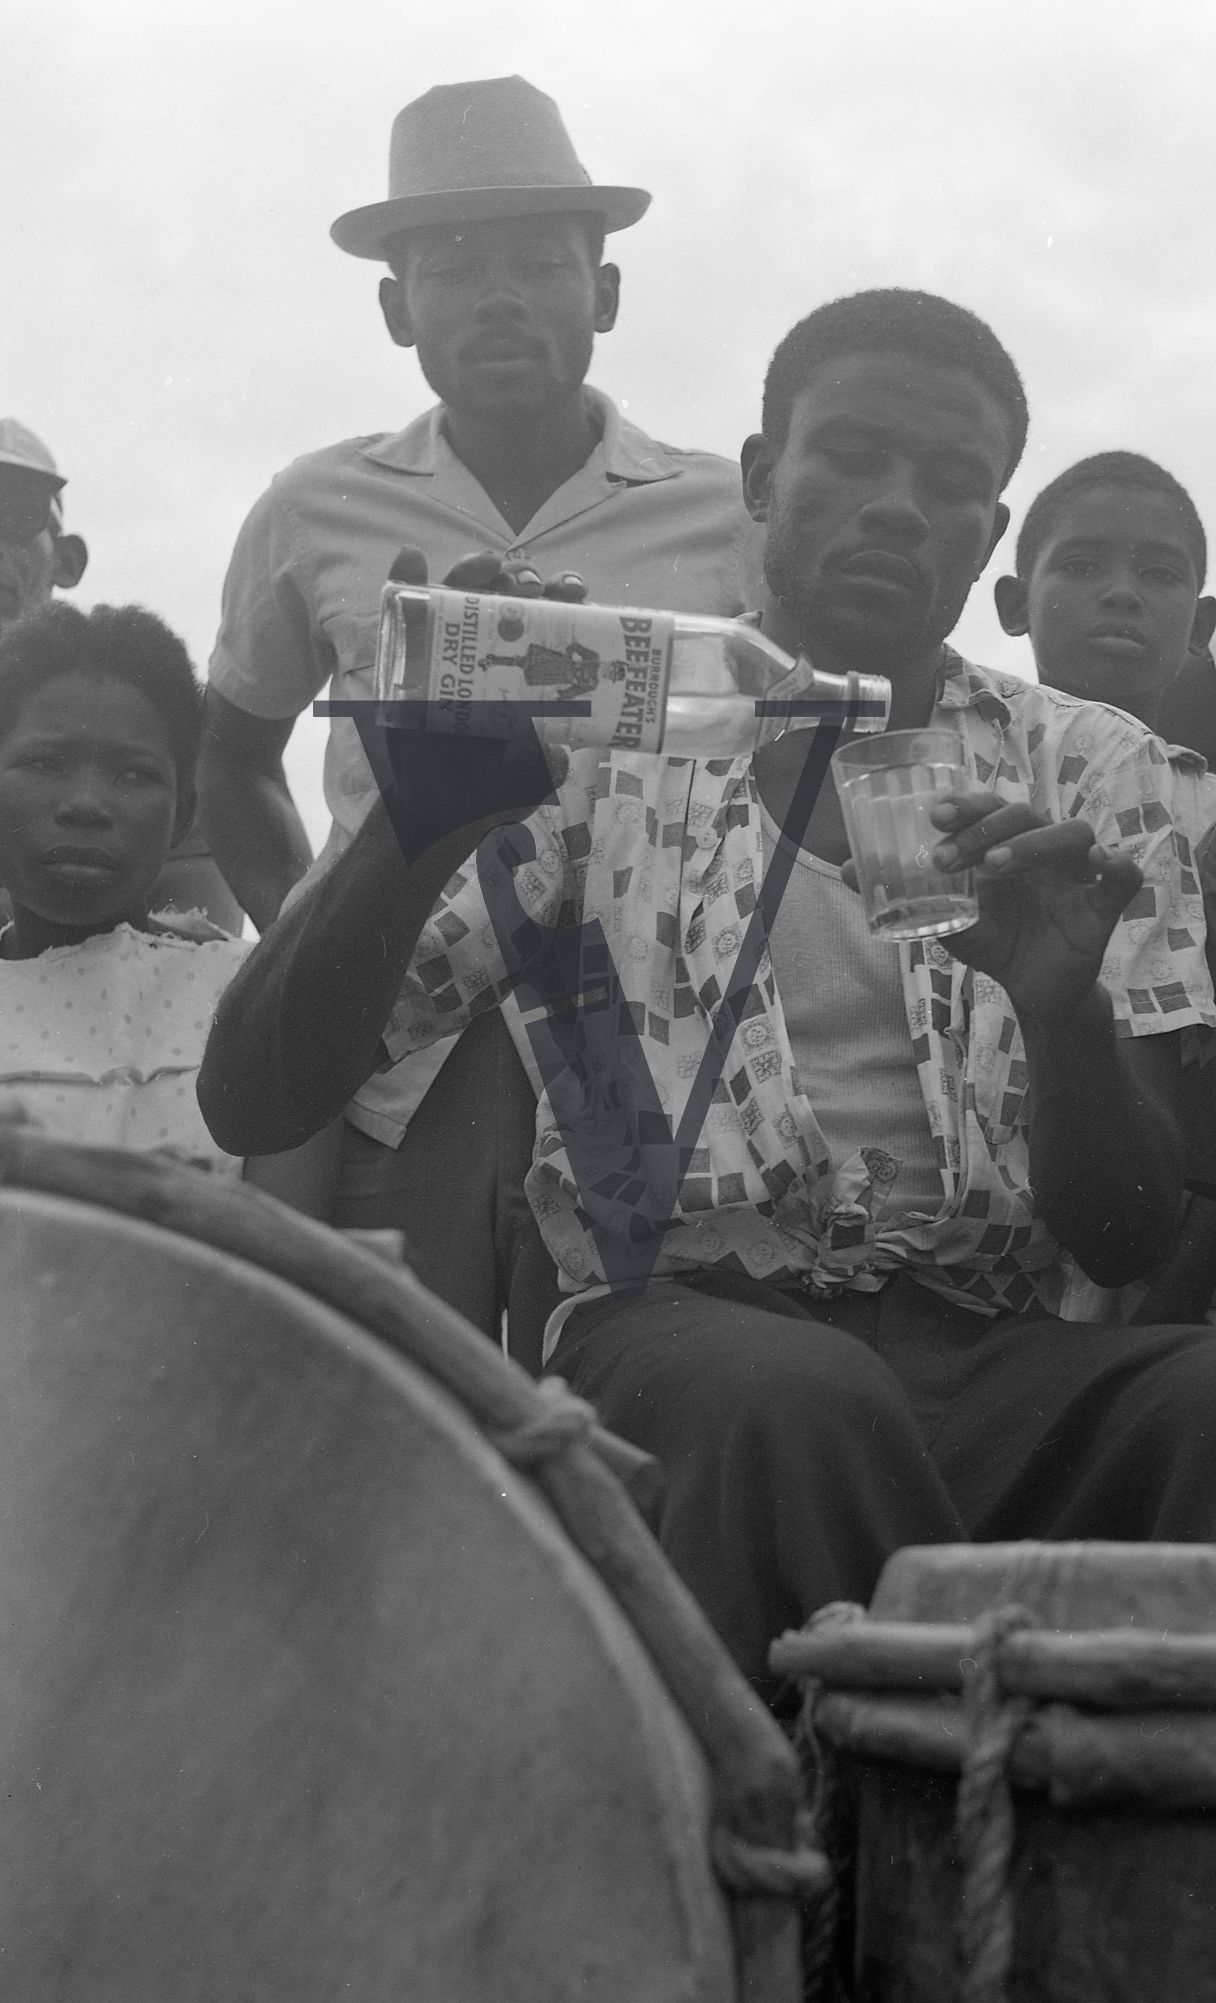 Belize, Man pours Beefeater Gin bottle into glass, man watches.